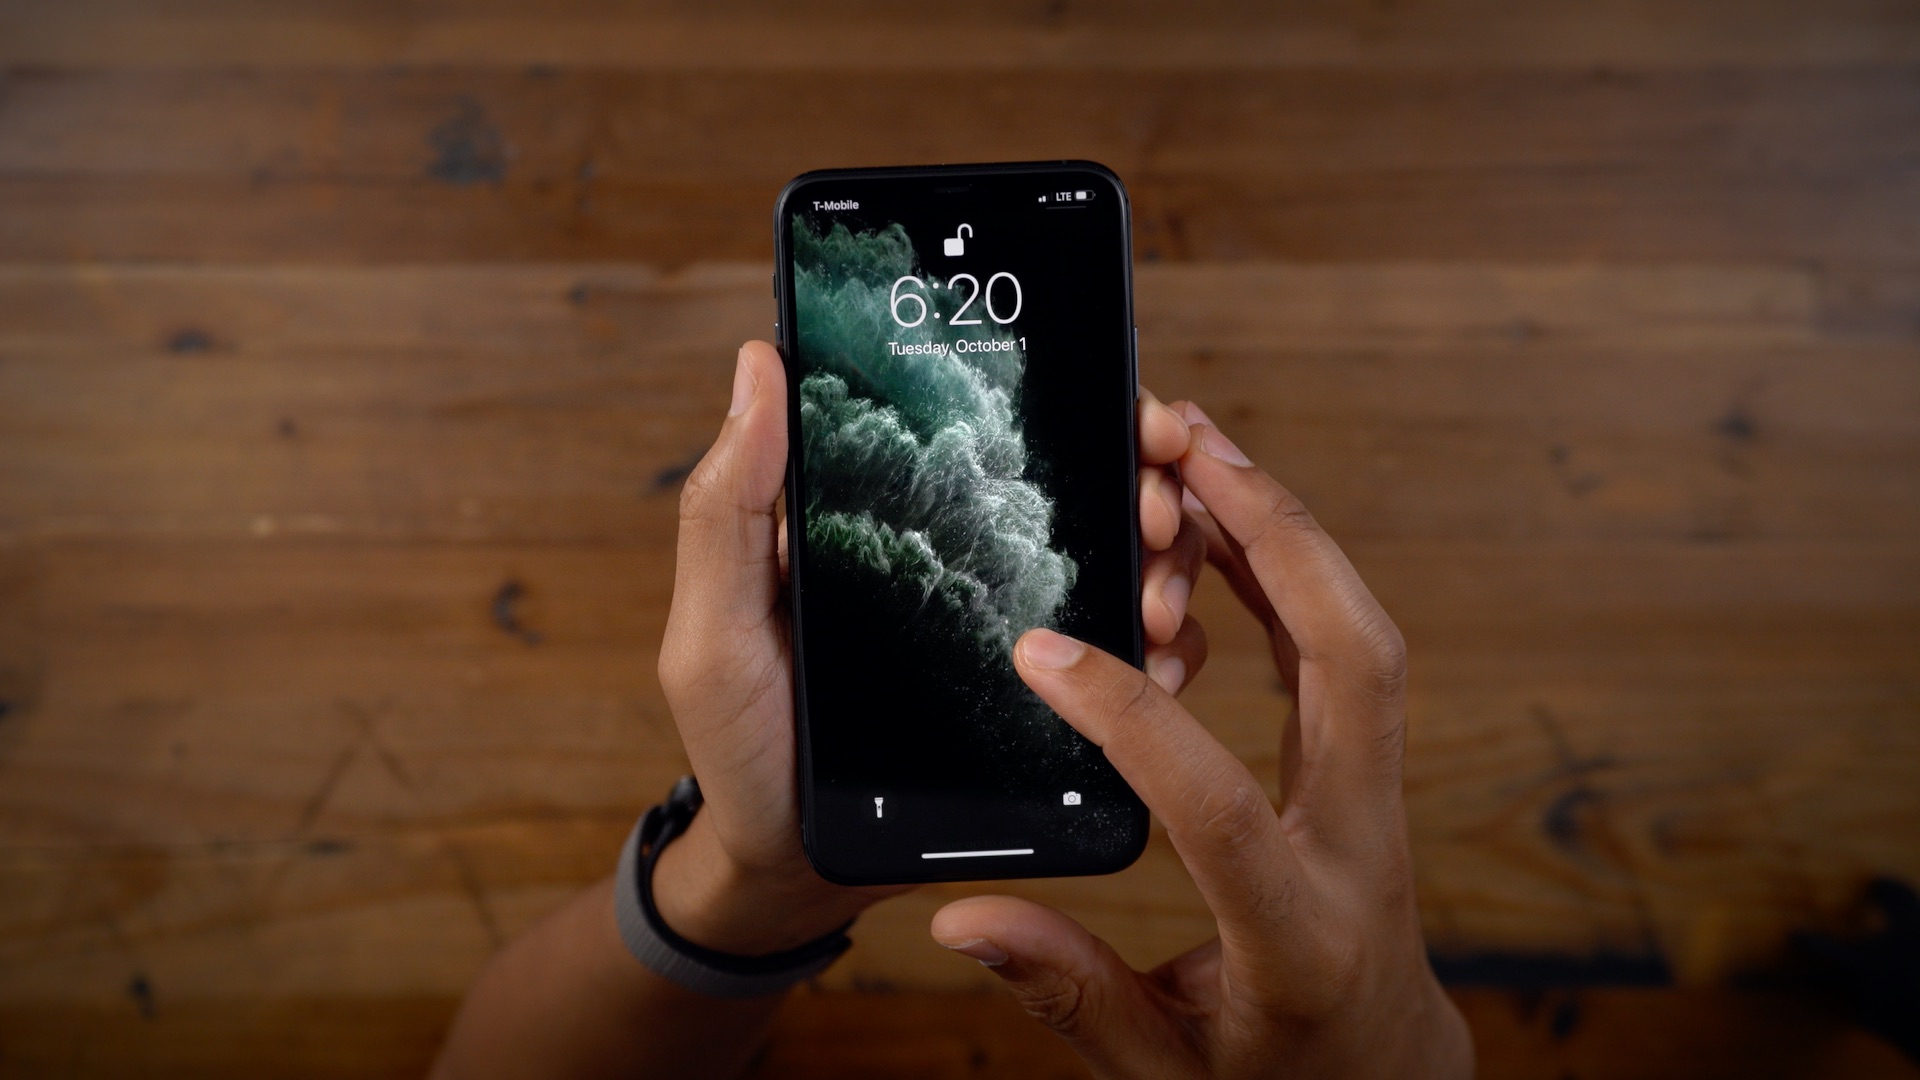 Top iPhone 11 Pro features: built for photo and video enthusiasts